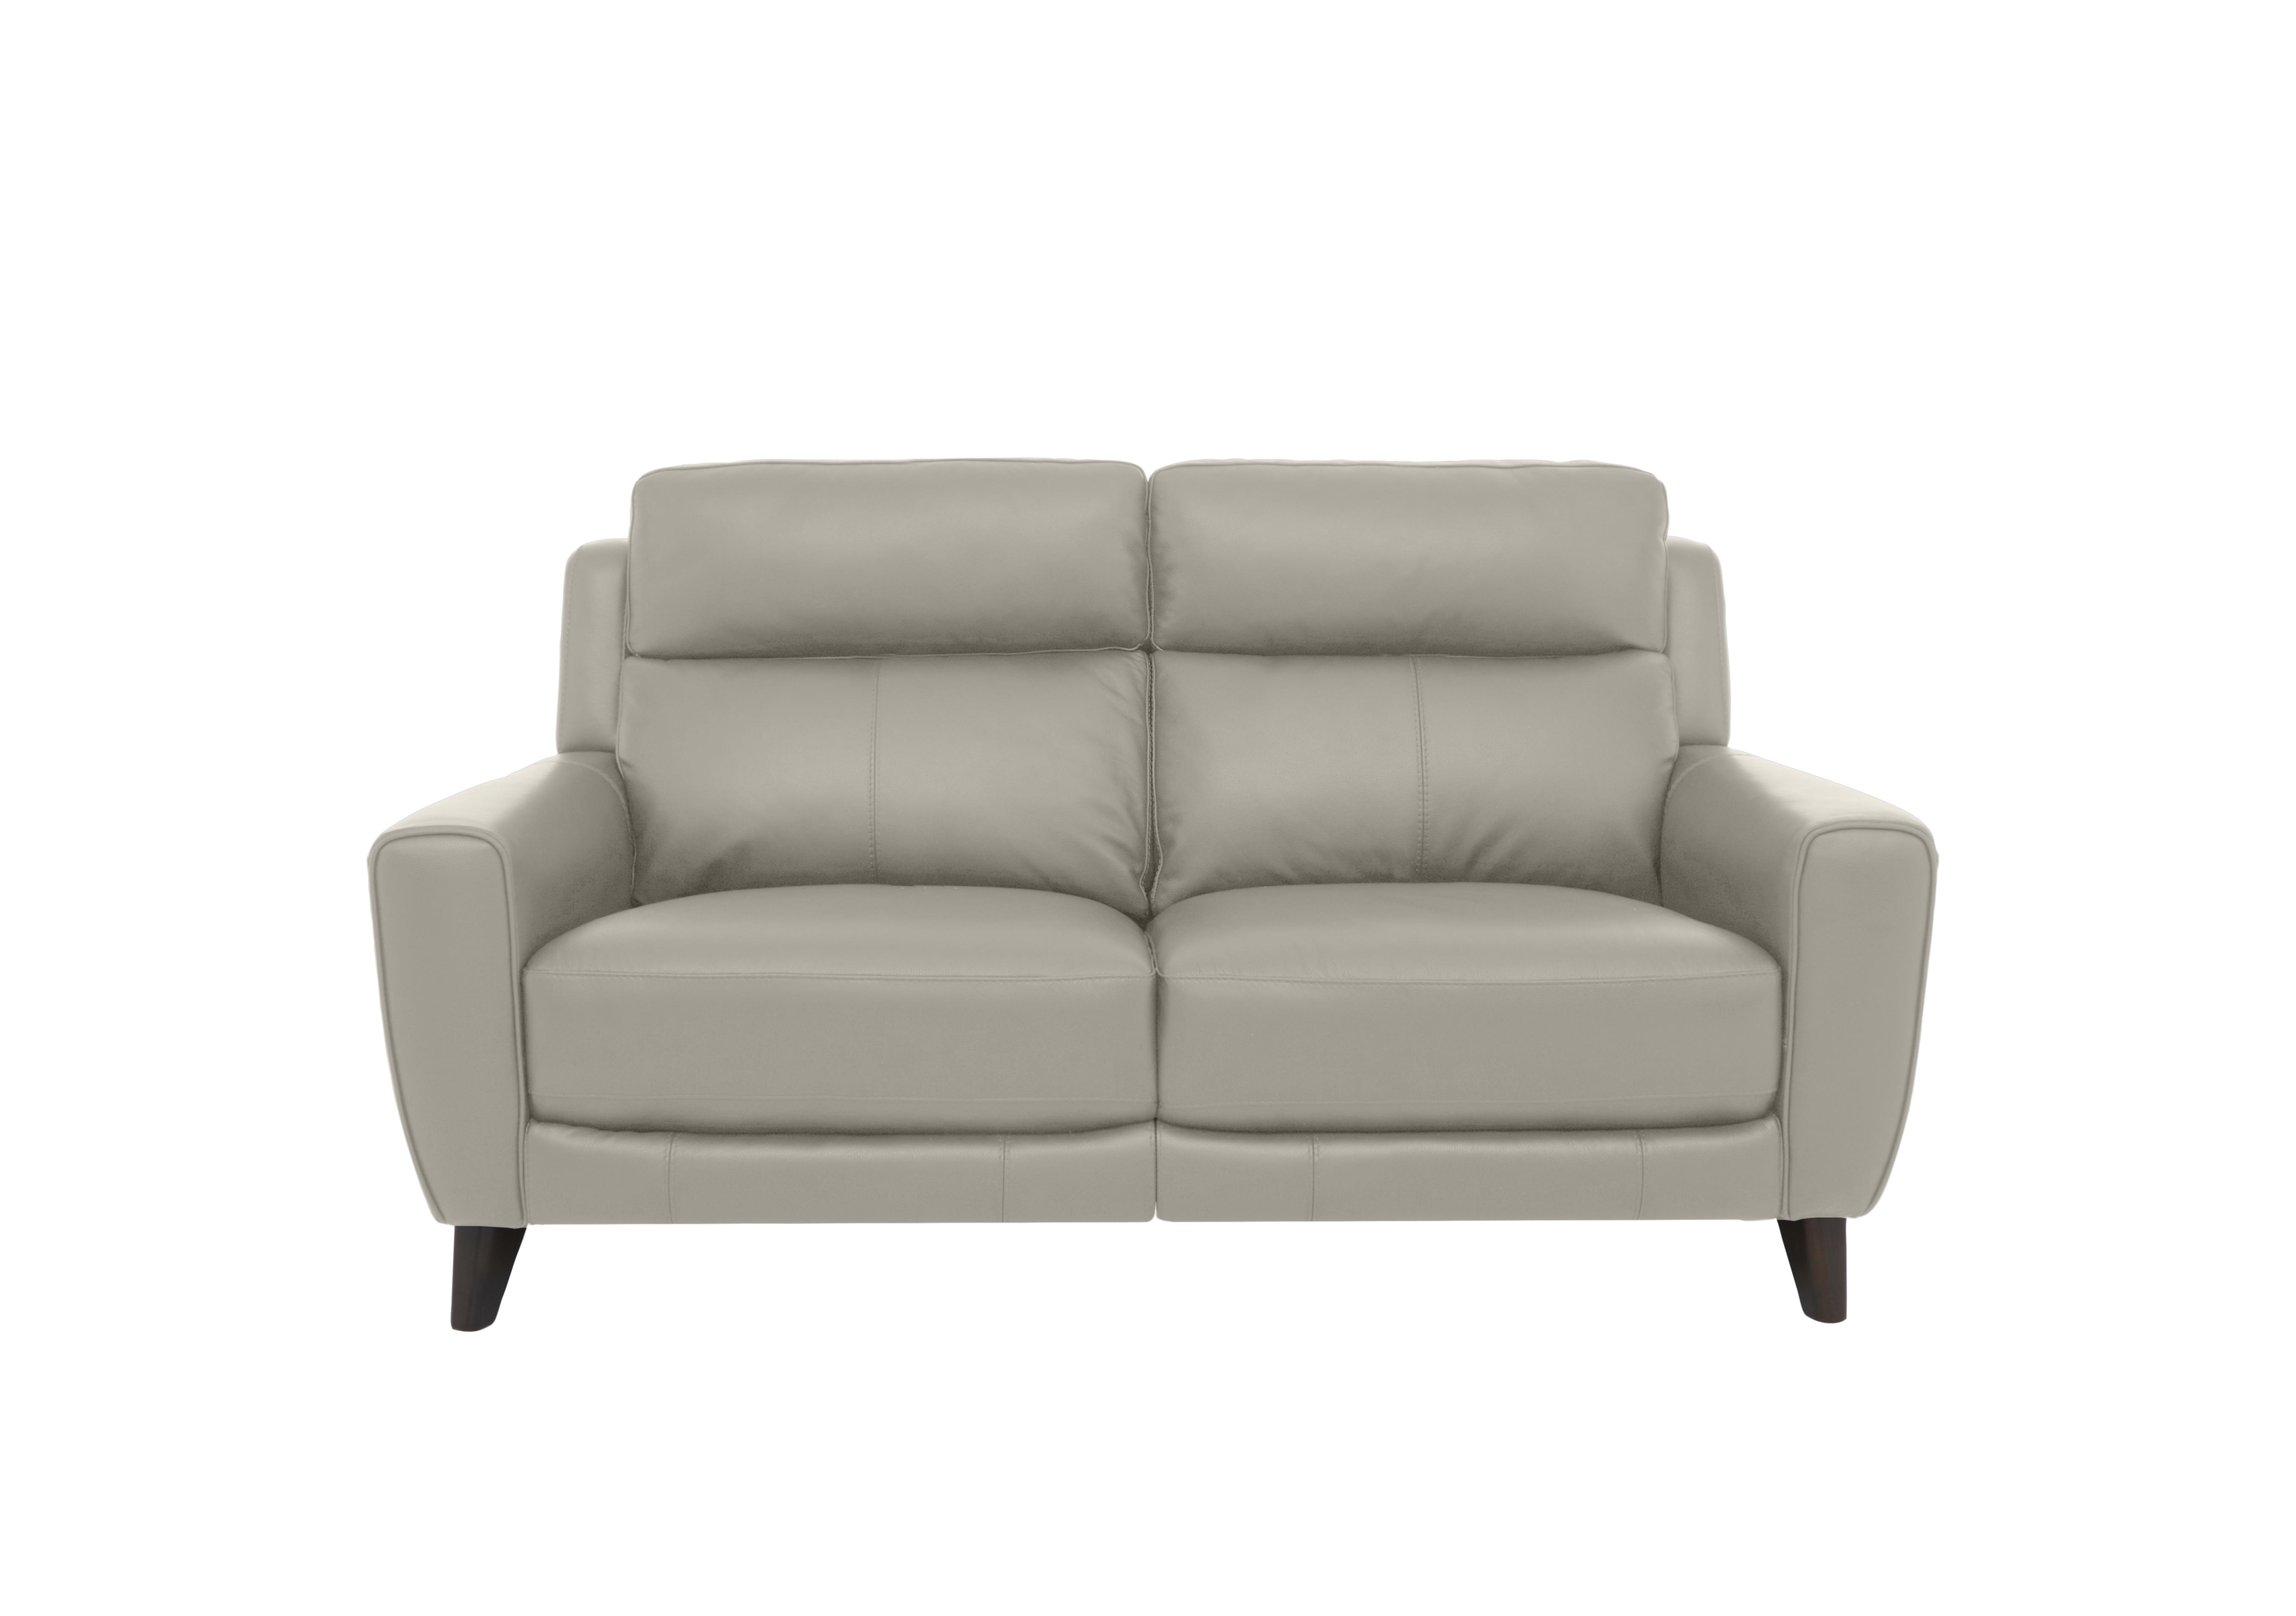 Zen 2 Seater Leather Power Recliner Sofa with Power Headrests and Power Lumbar in Bx-251e Grey on Furniture Village